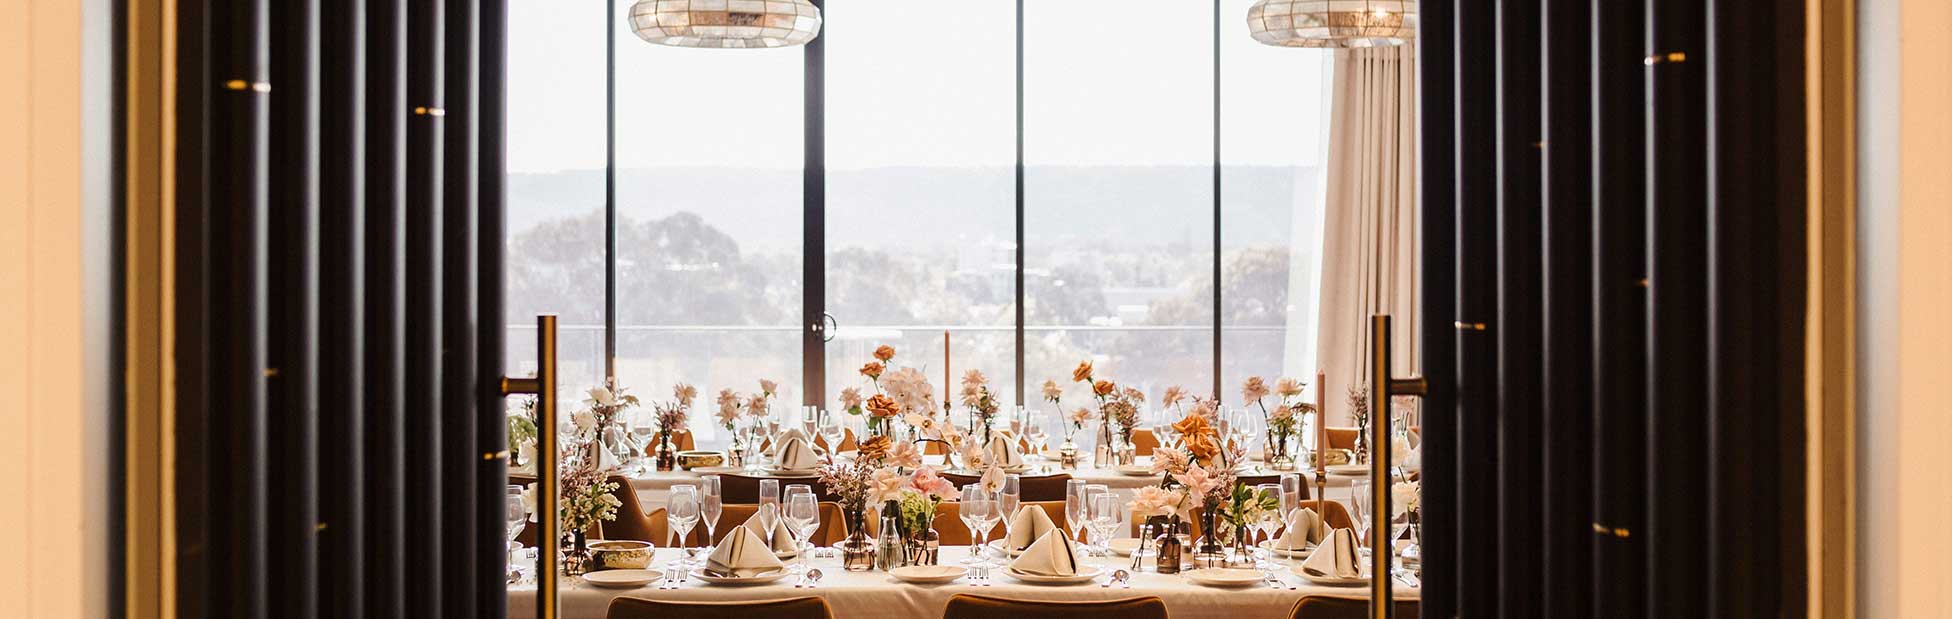 View out window of mountains foregrouns floral styled event room through grand doors